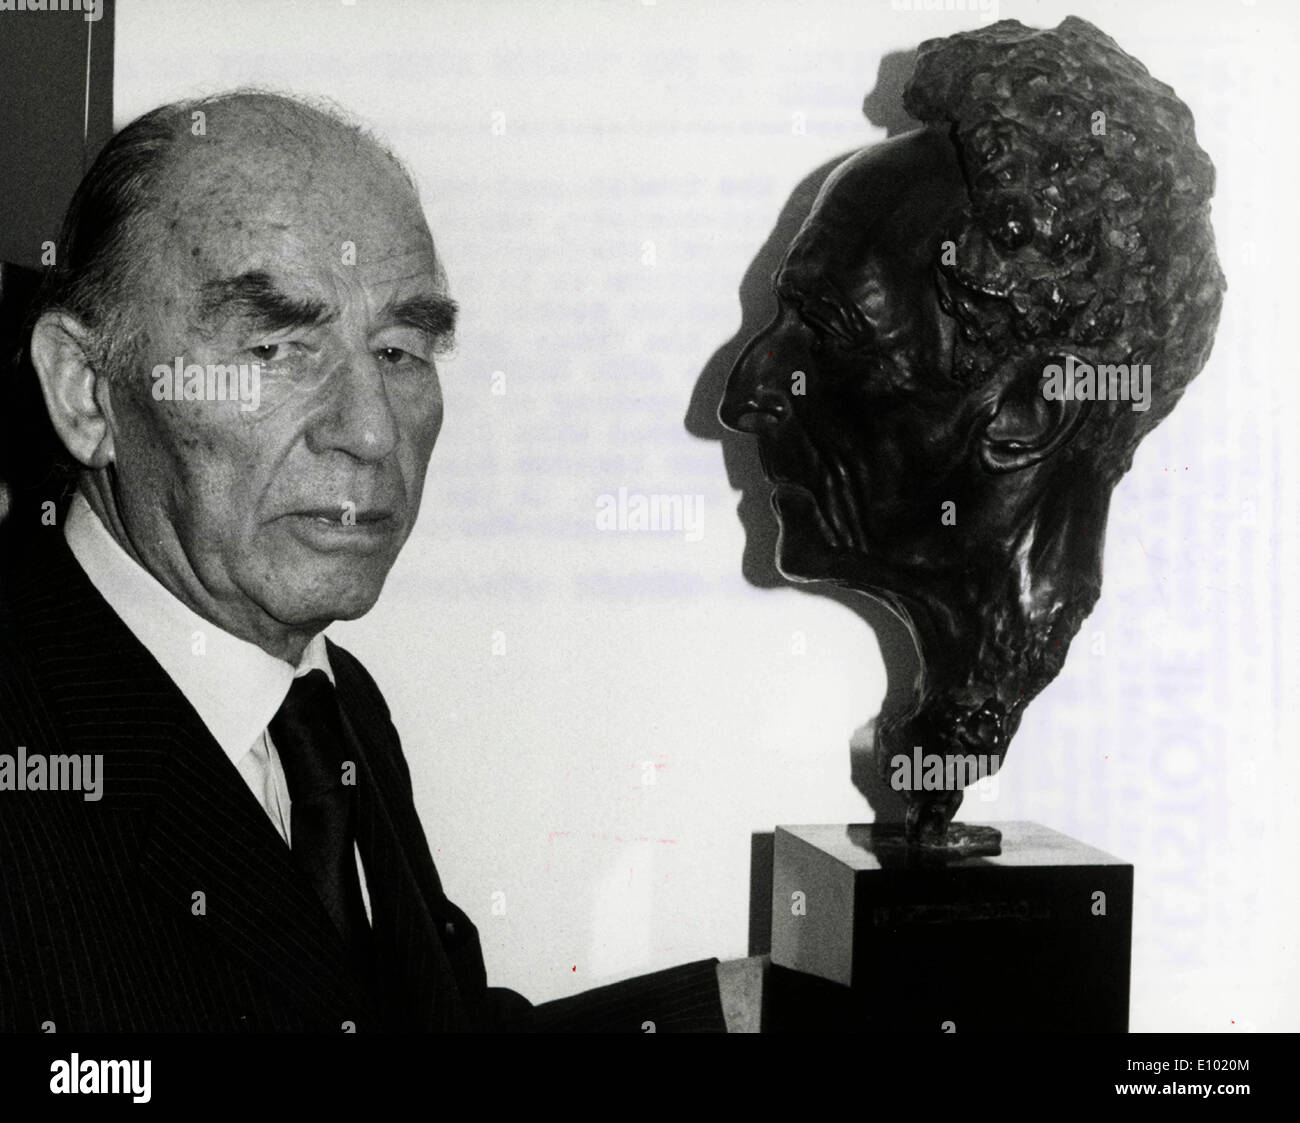 ARNO BREKER German sculptor, best known for his public works in Nazi Germany. Stock Photo